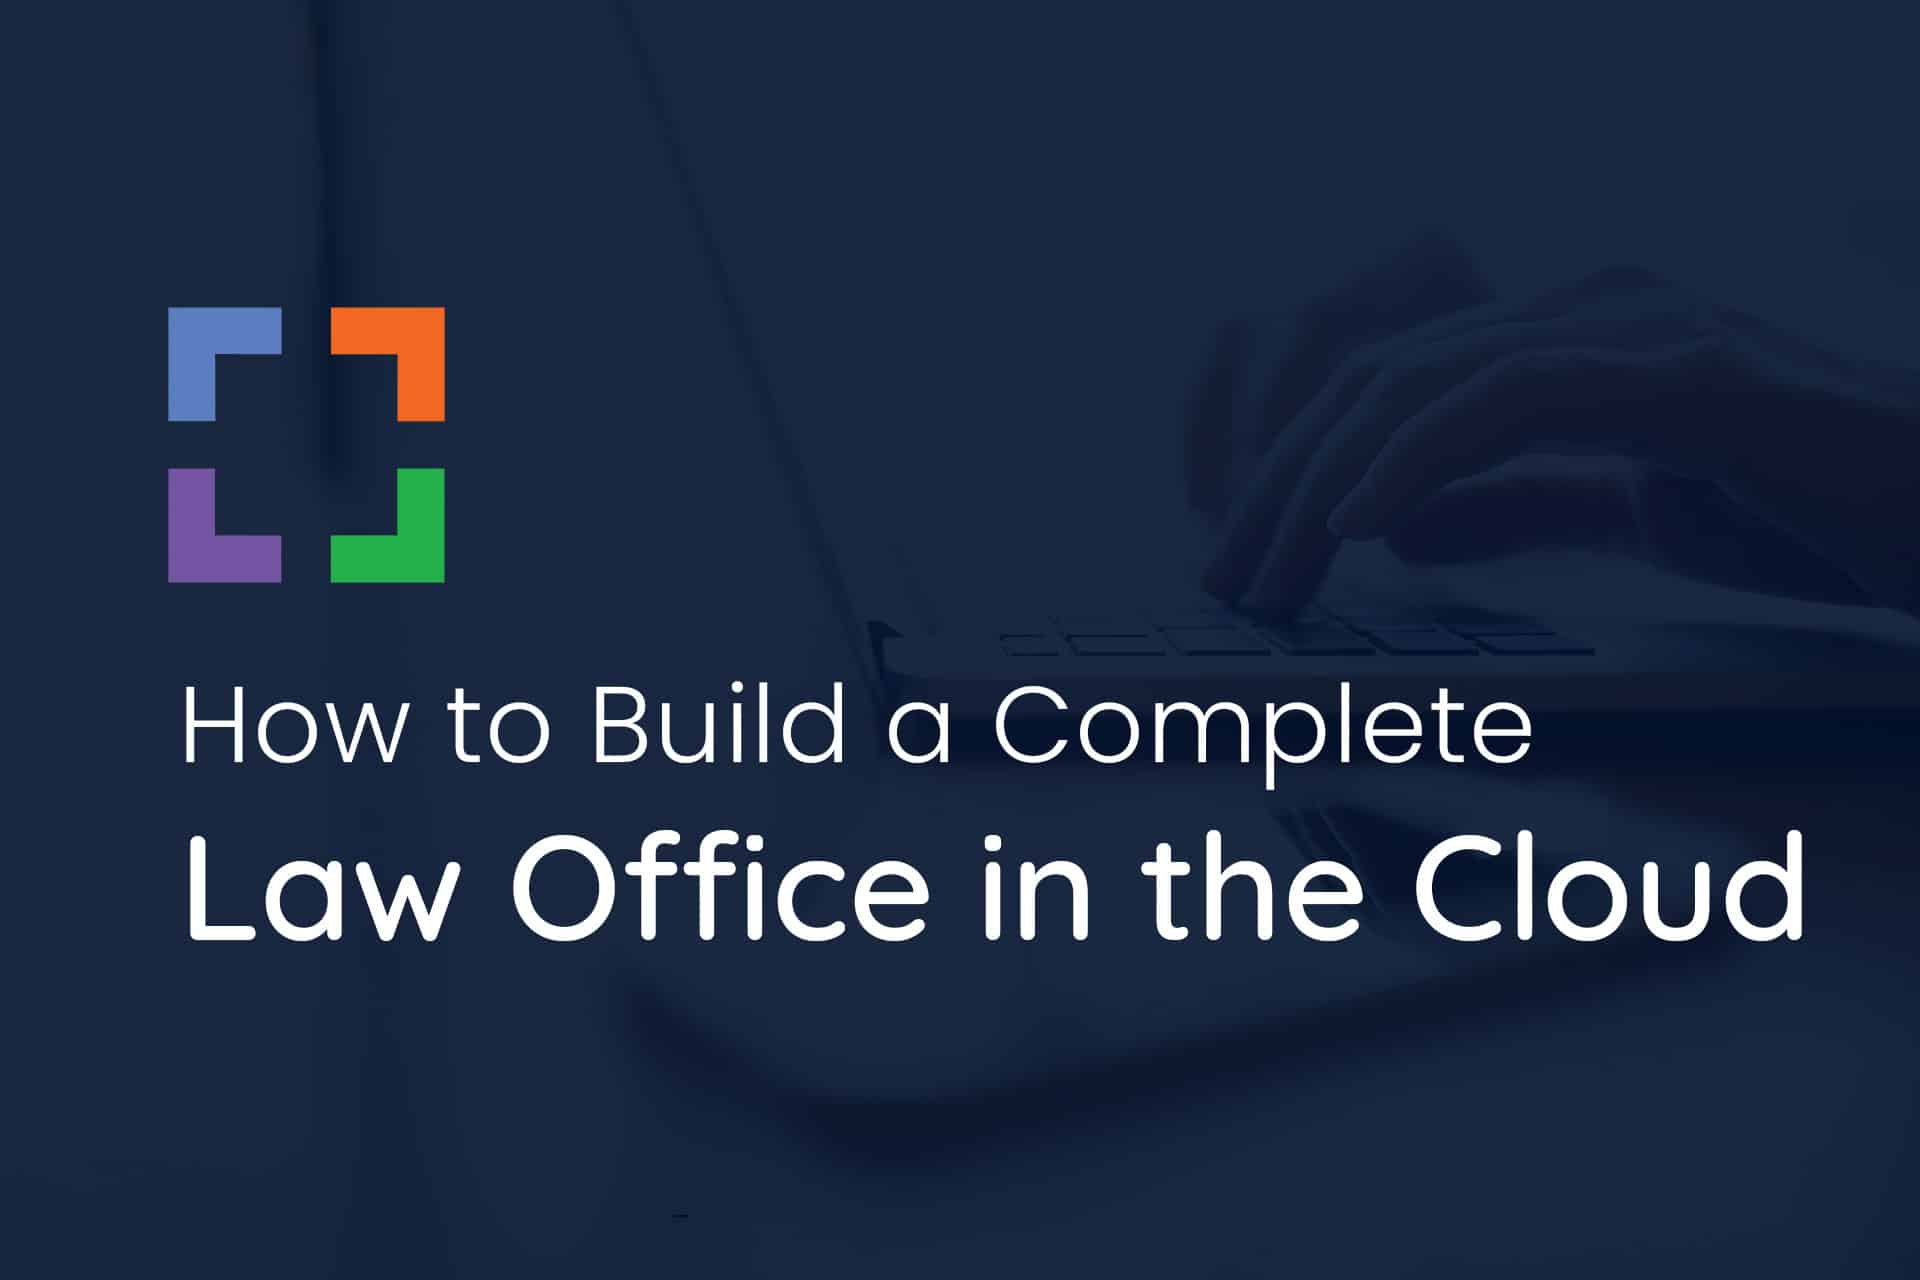 How to Build a Complete Law Office in the Cloud